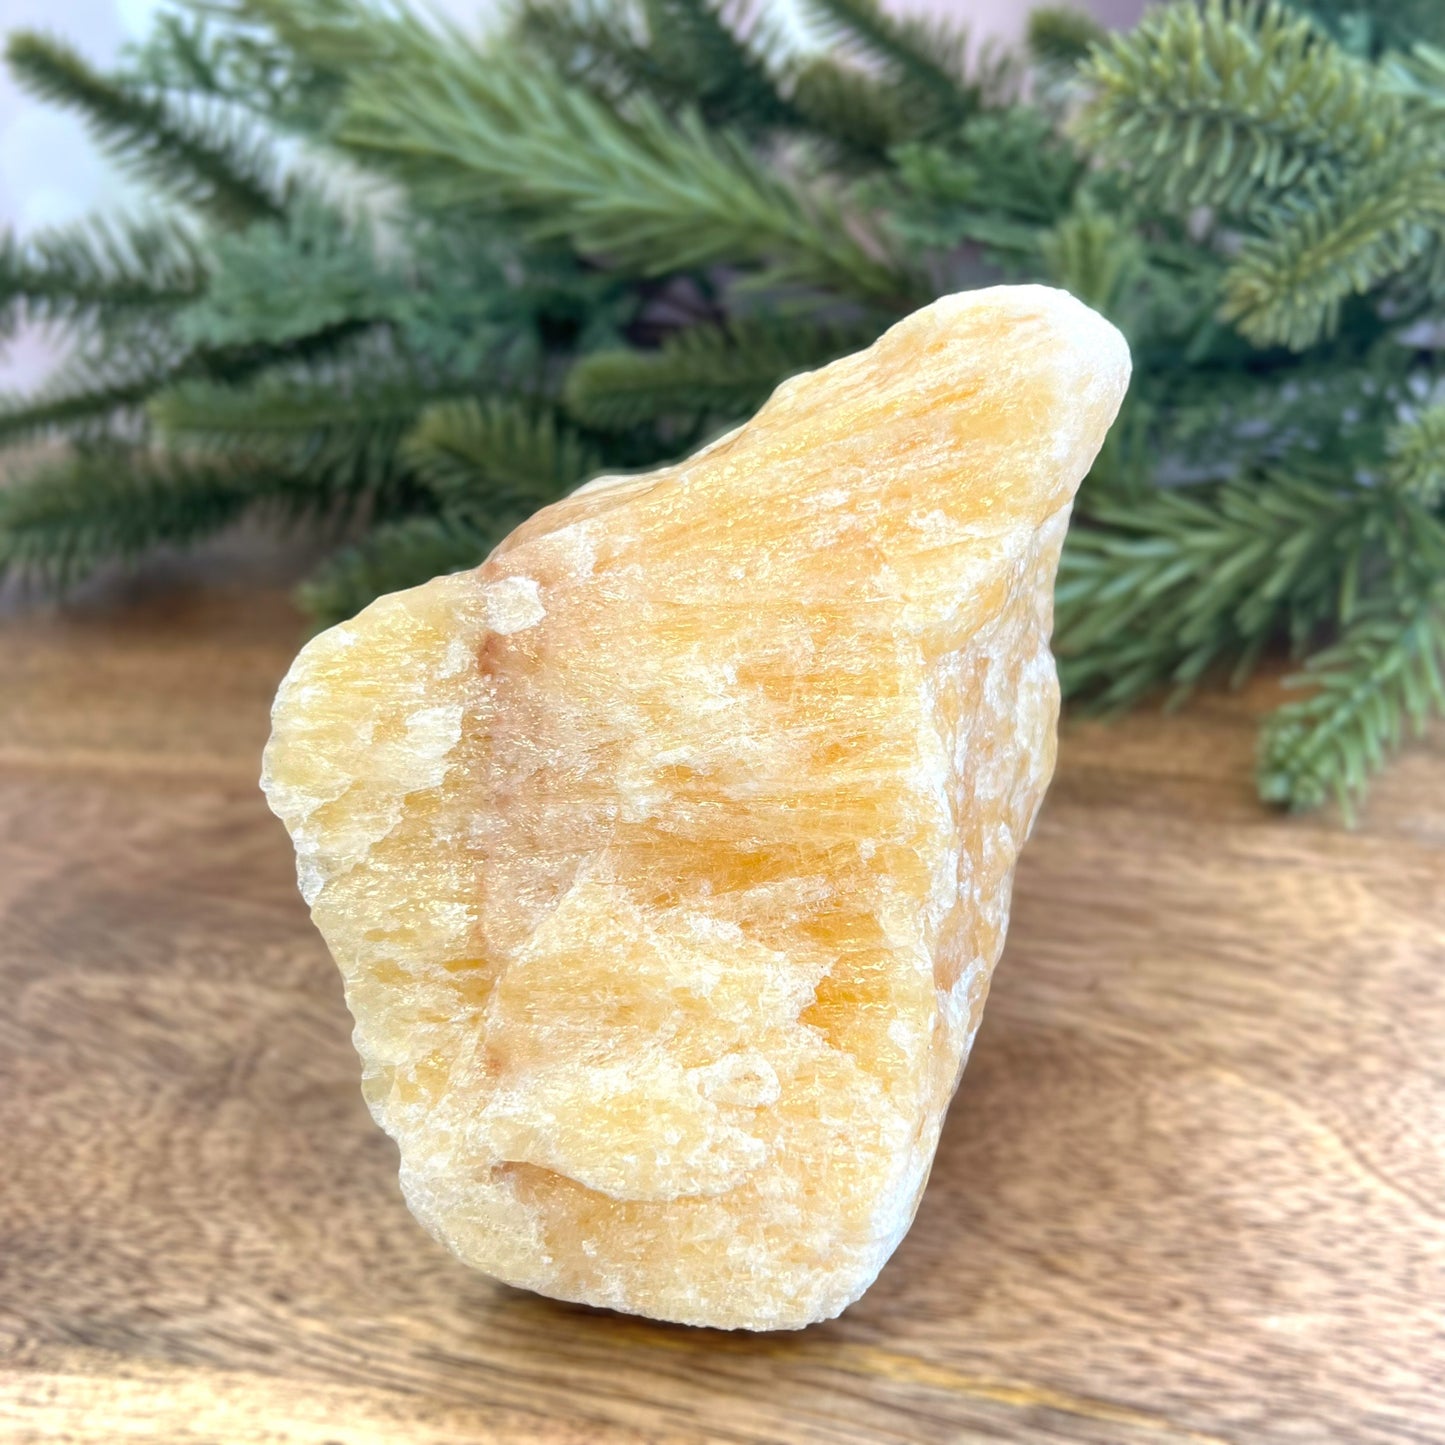 Image of a large, rough chunk piece of yellow Calcite crystal from Mexico. Very sunny color with a darker band. Rough on all edges, with a cylinder cut out on one side.